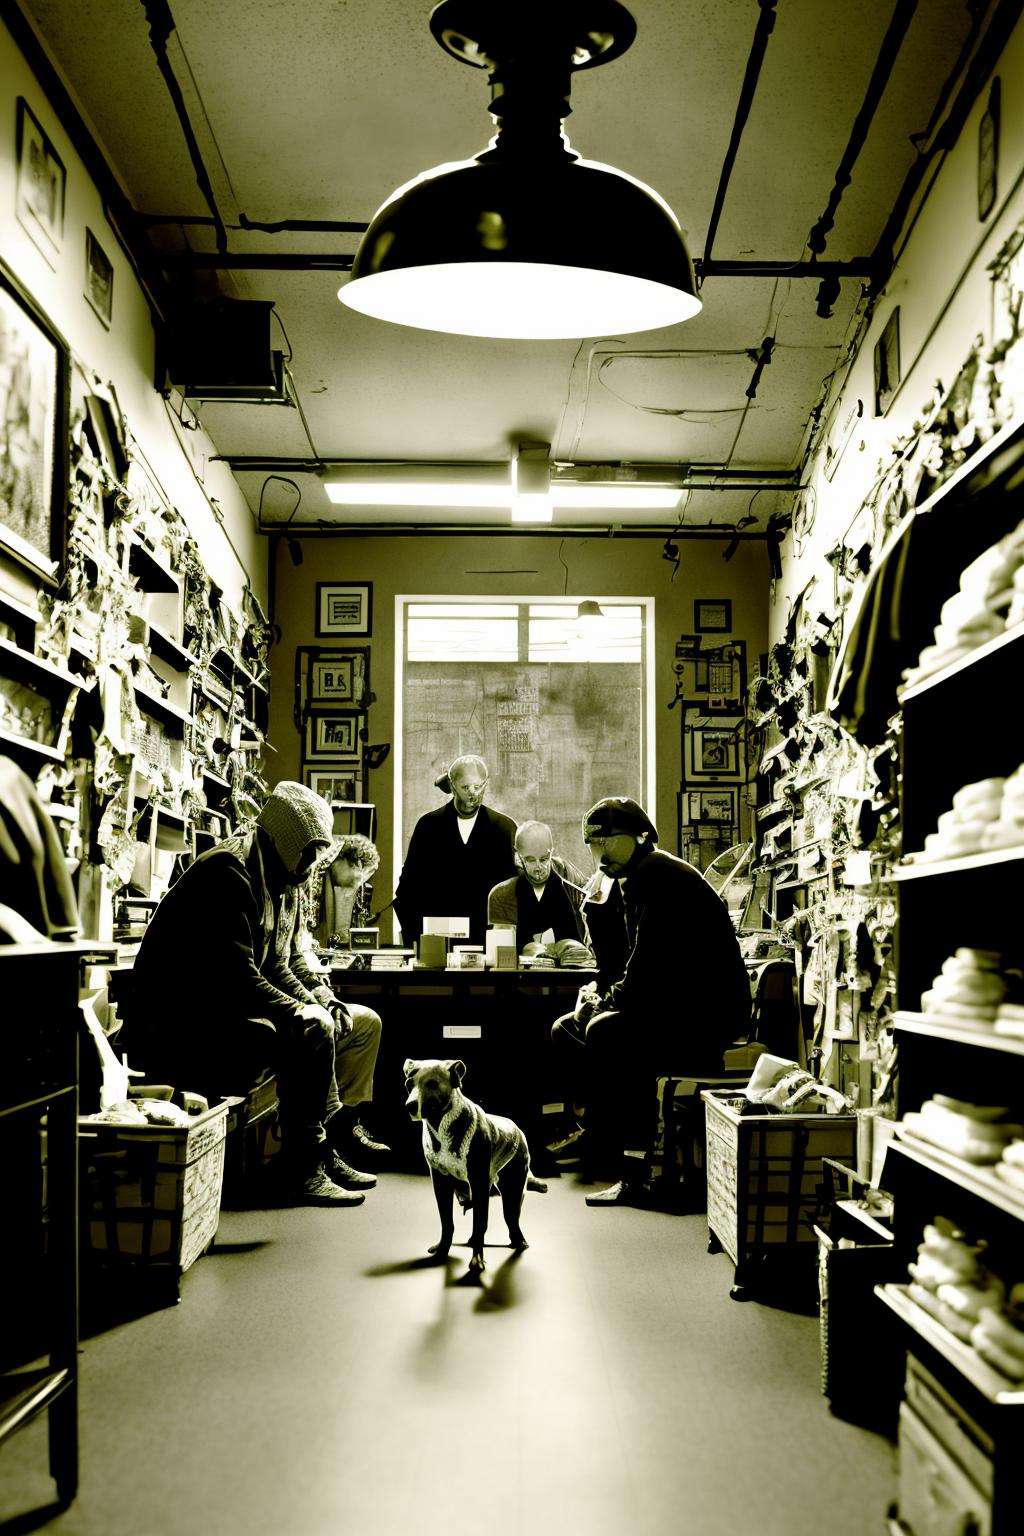 a group of people sitting around a table in a room , a man walking a dog in front of a store